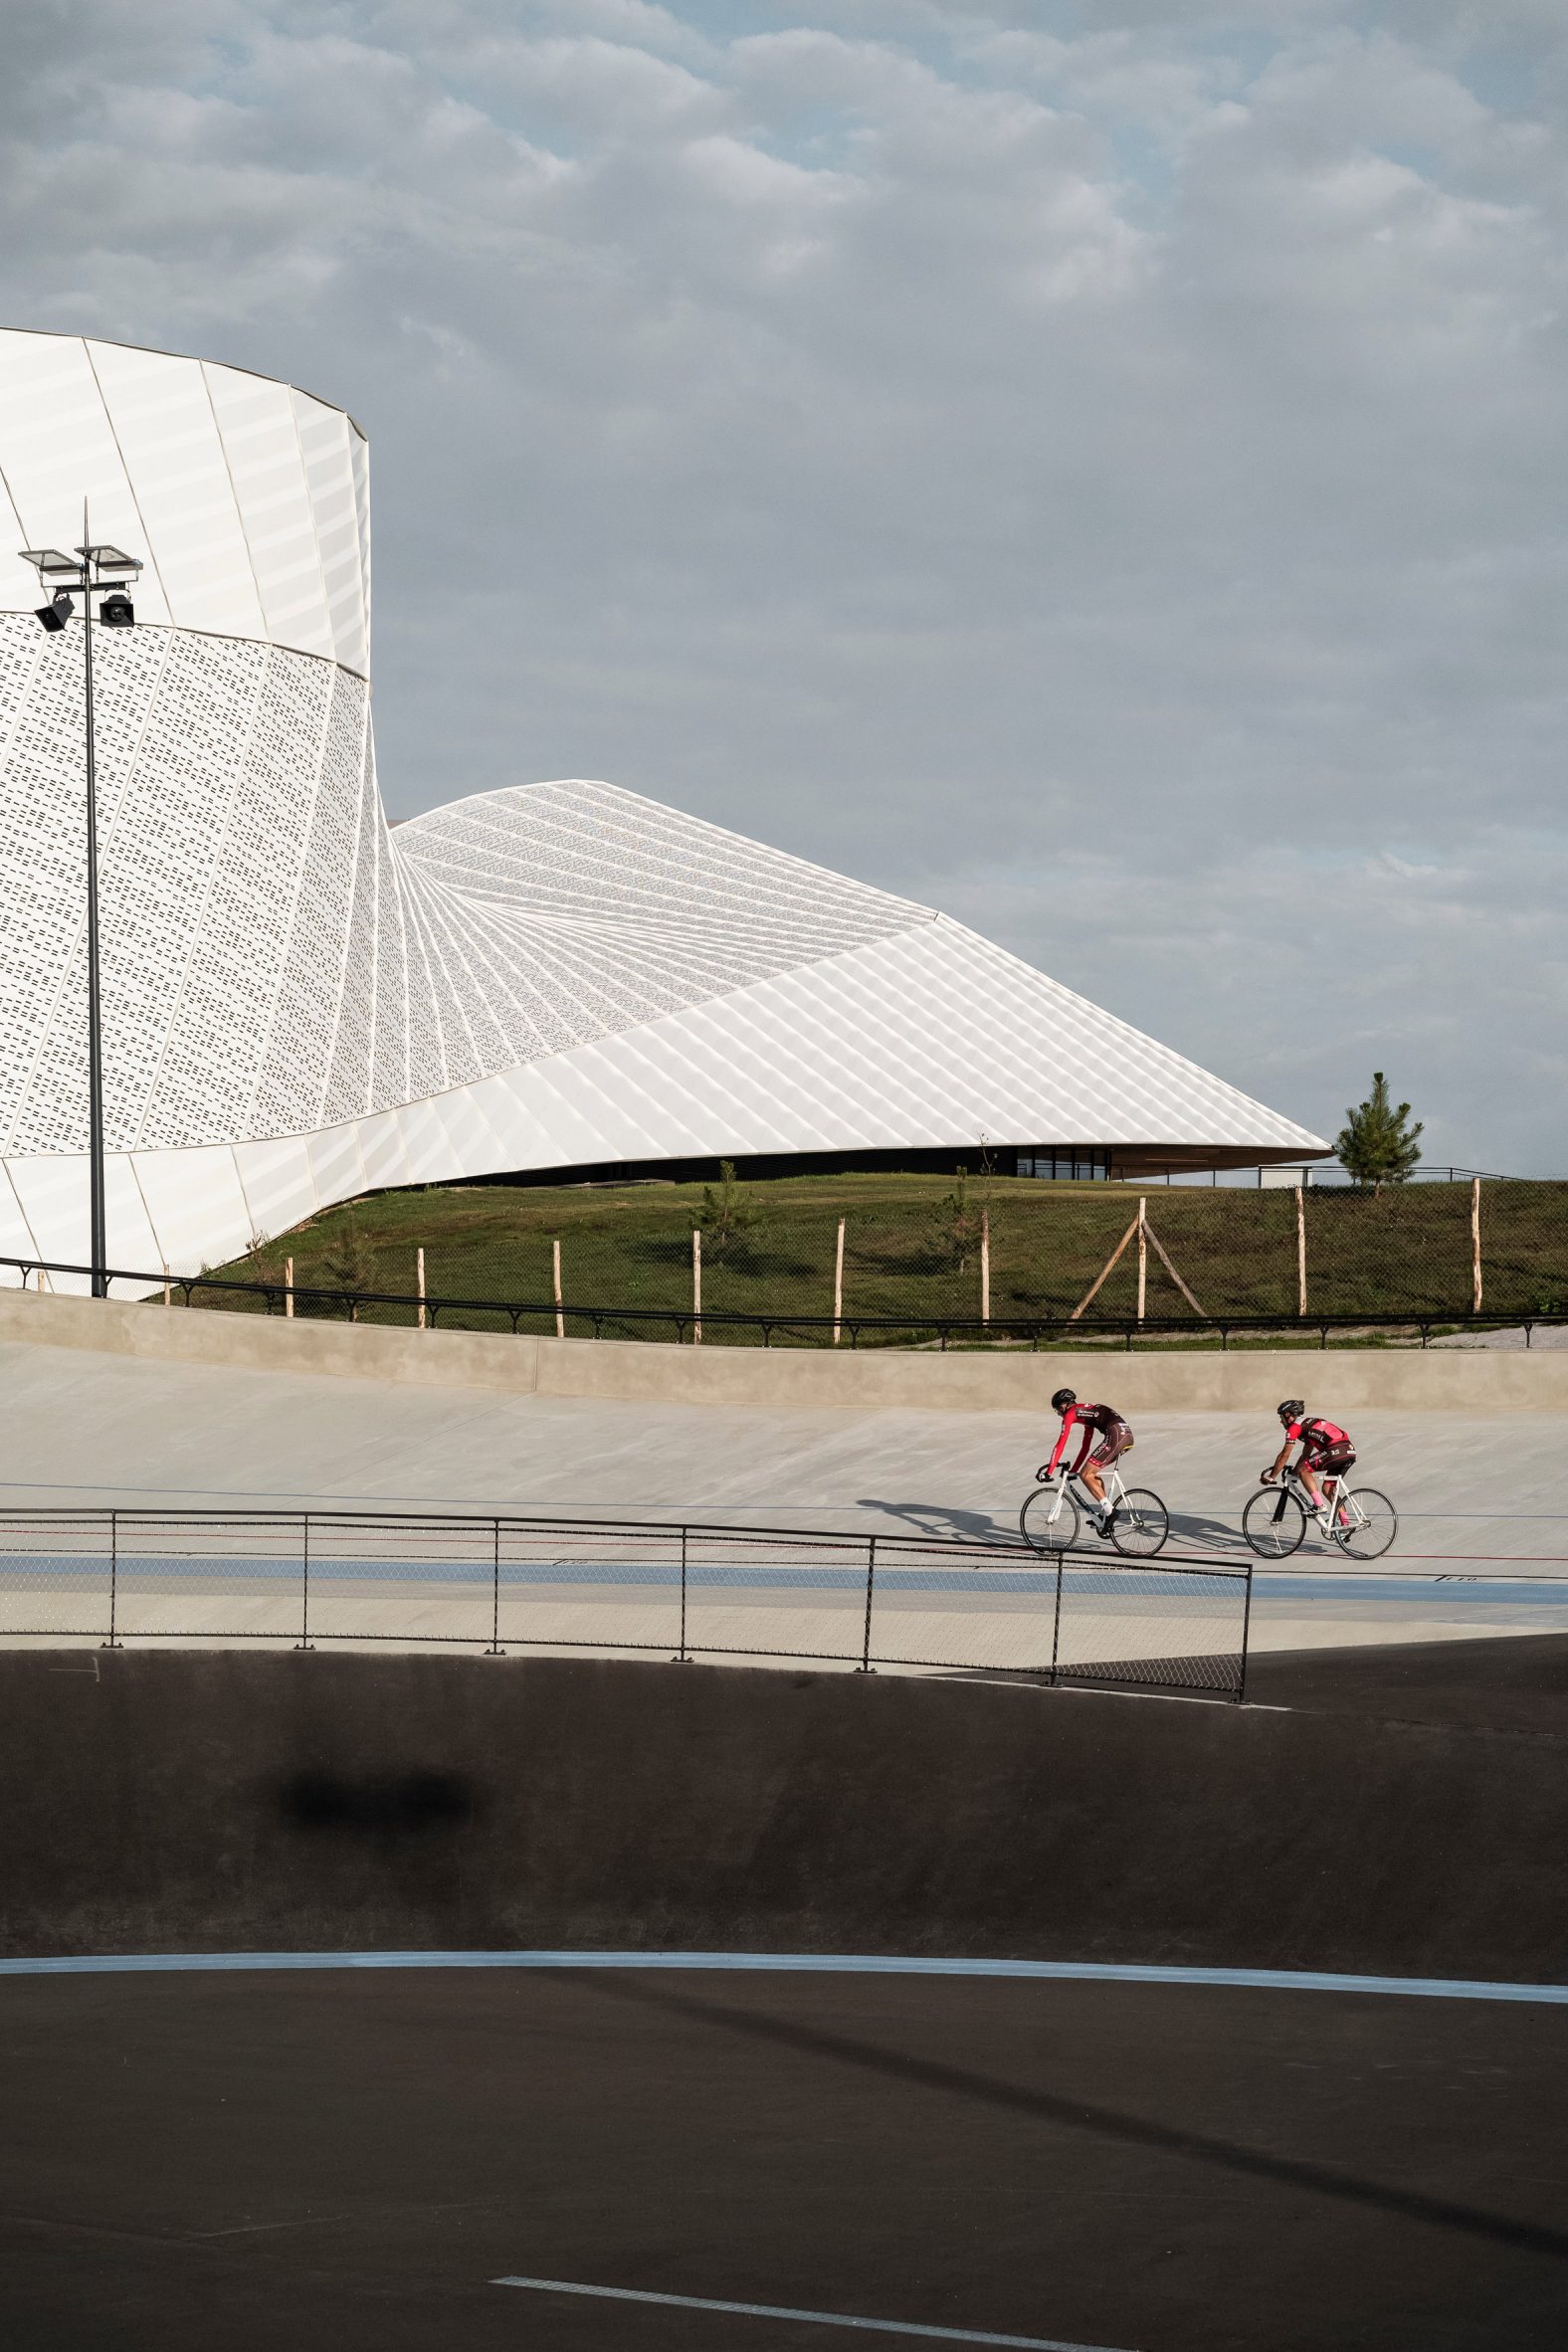 Cyclists outside the Espace Mayenne in France